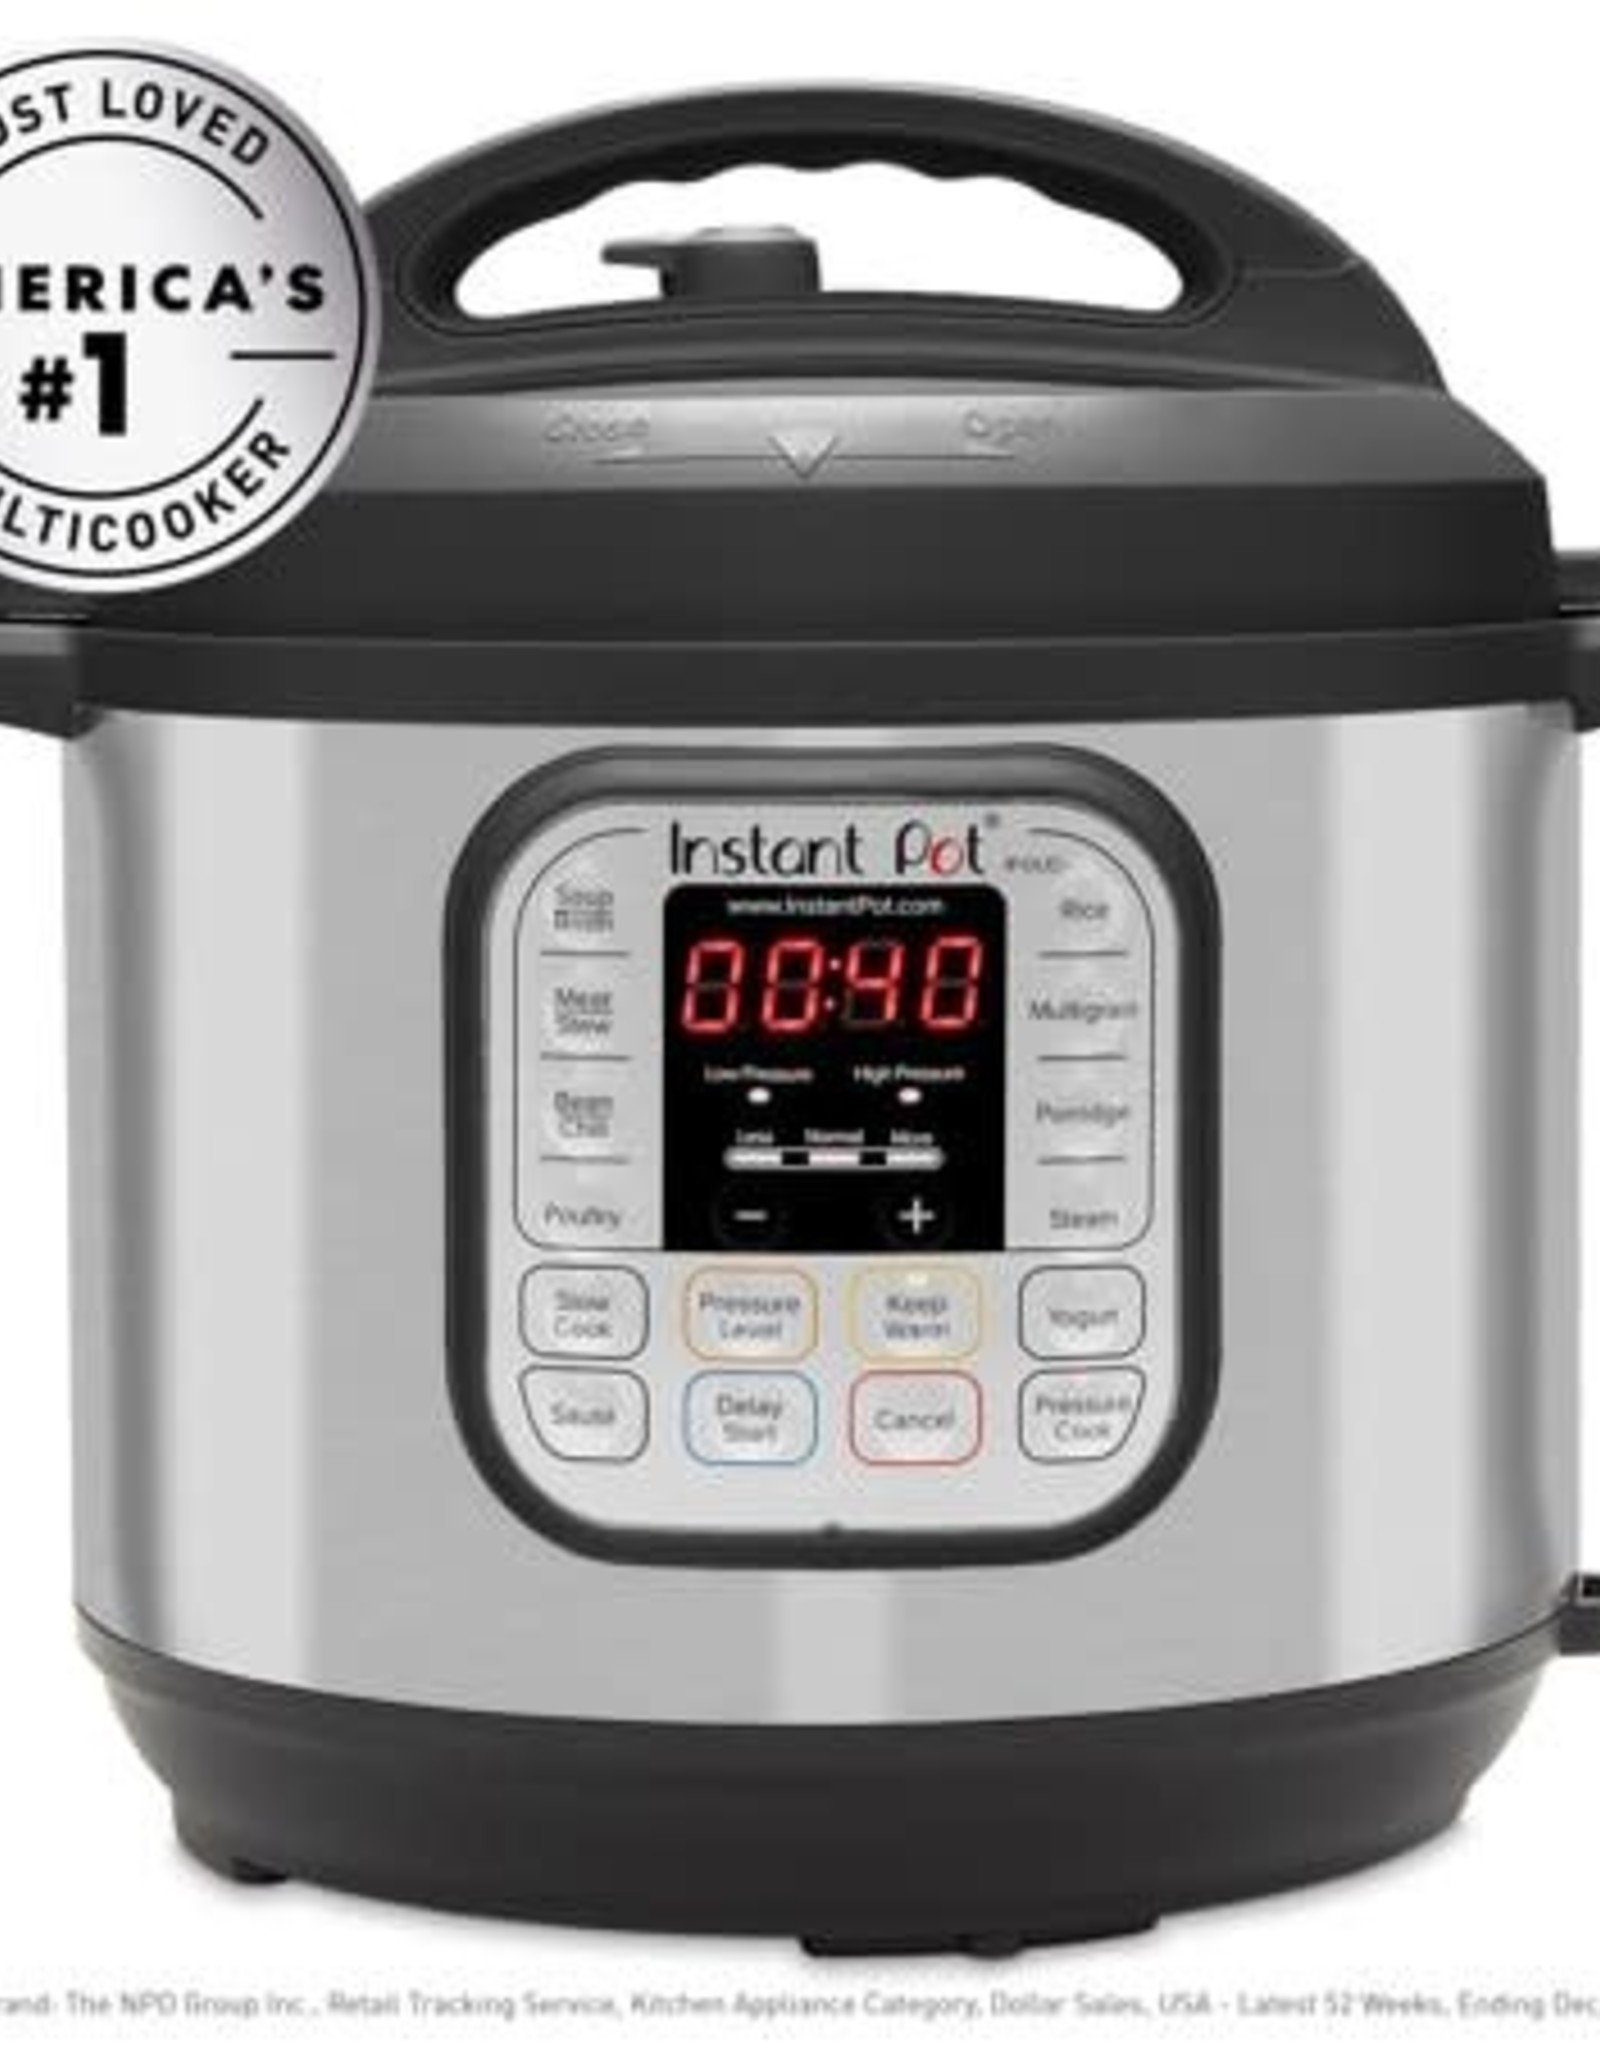 Instant Pot DUO60 6-Quart 7-in-1 Multi-Use Programmable Pressure Cooker,  Slow Cooker, Rice